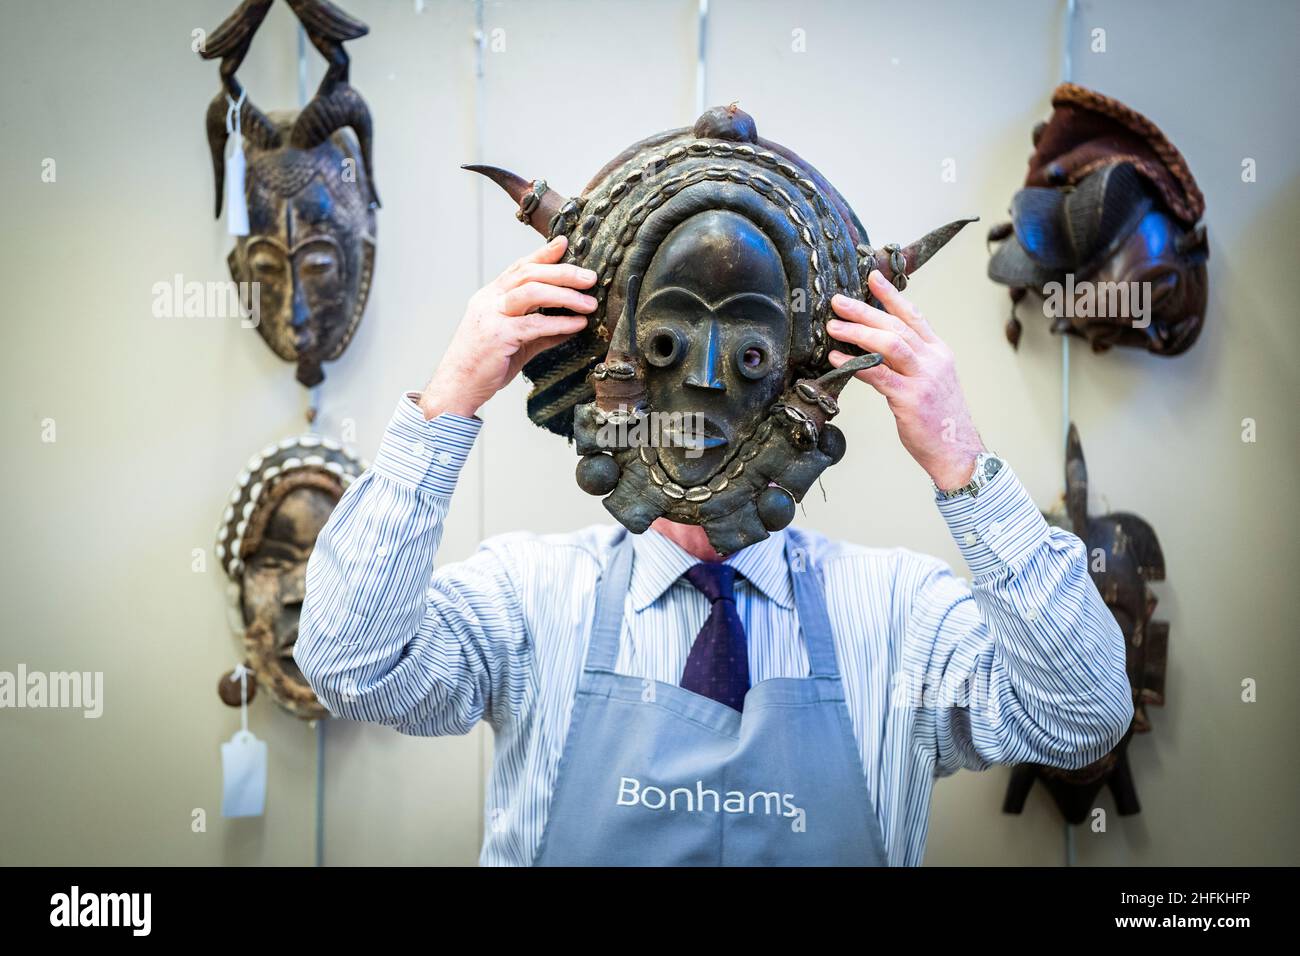 Bonhams' Danny McIlwraith holds a Nigerian polycrome carved wood mask during a photocall for the sale of the Jim Lennon Collection at Bonhams in Edinburgh. The collection of Silver, Asian and European Works of Art includes a rare Irish Neolithic bog oak dugout canoe, an 1877 Scottish silver Warwick vase by Mark Aitchison, a rare early English leaded bronze posnet dating from the 13th or 14th Century, and two pairs of Sancai glazed Guardian Figures from the Ming Dynasty. Picture date: Monday January 17, 2022. Stock Photo